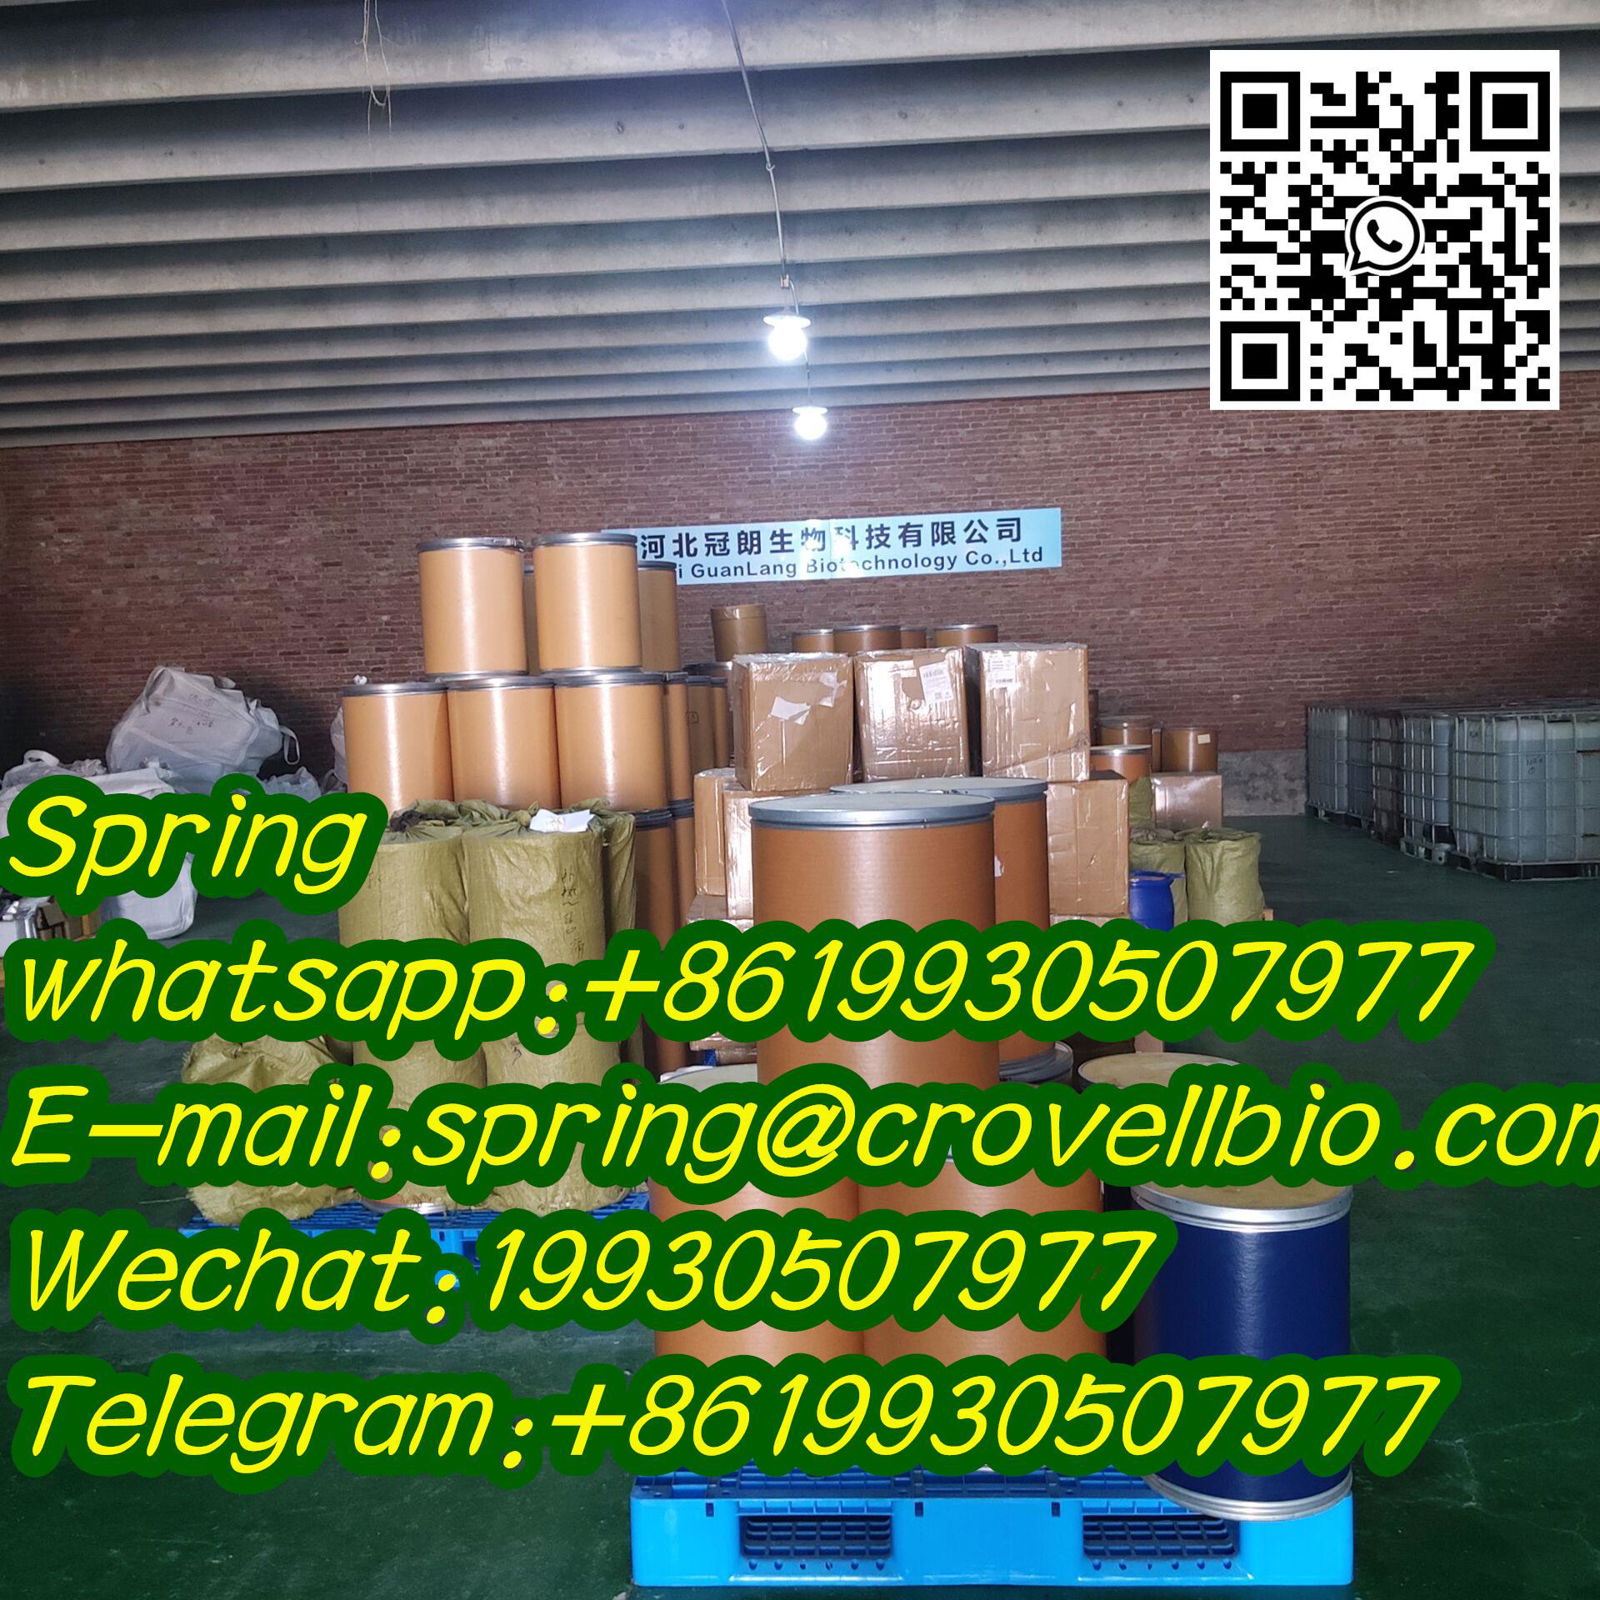 China factory  93-0272 5-Dimethoxybenzaldehyde with safe delivery +8619930507977 5